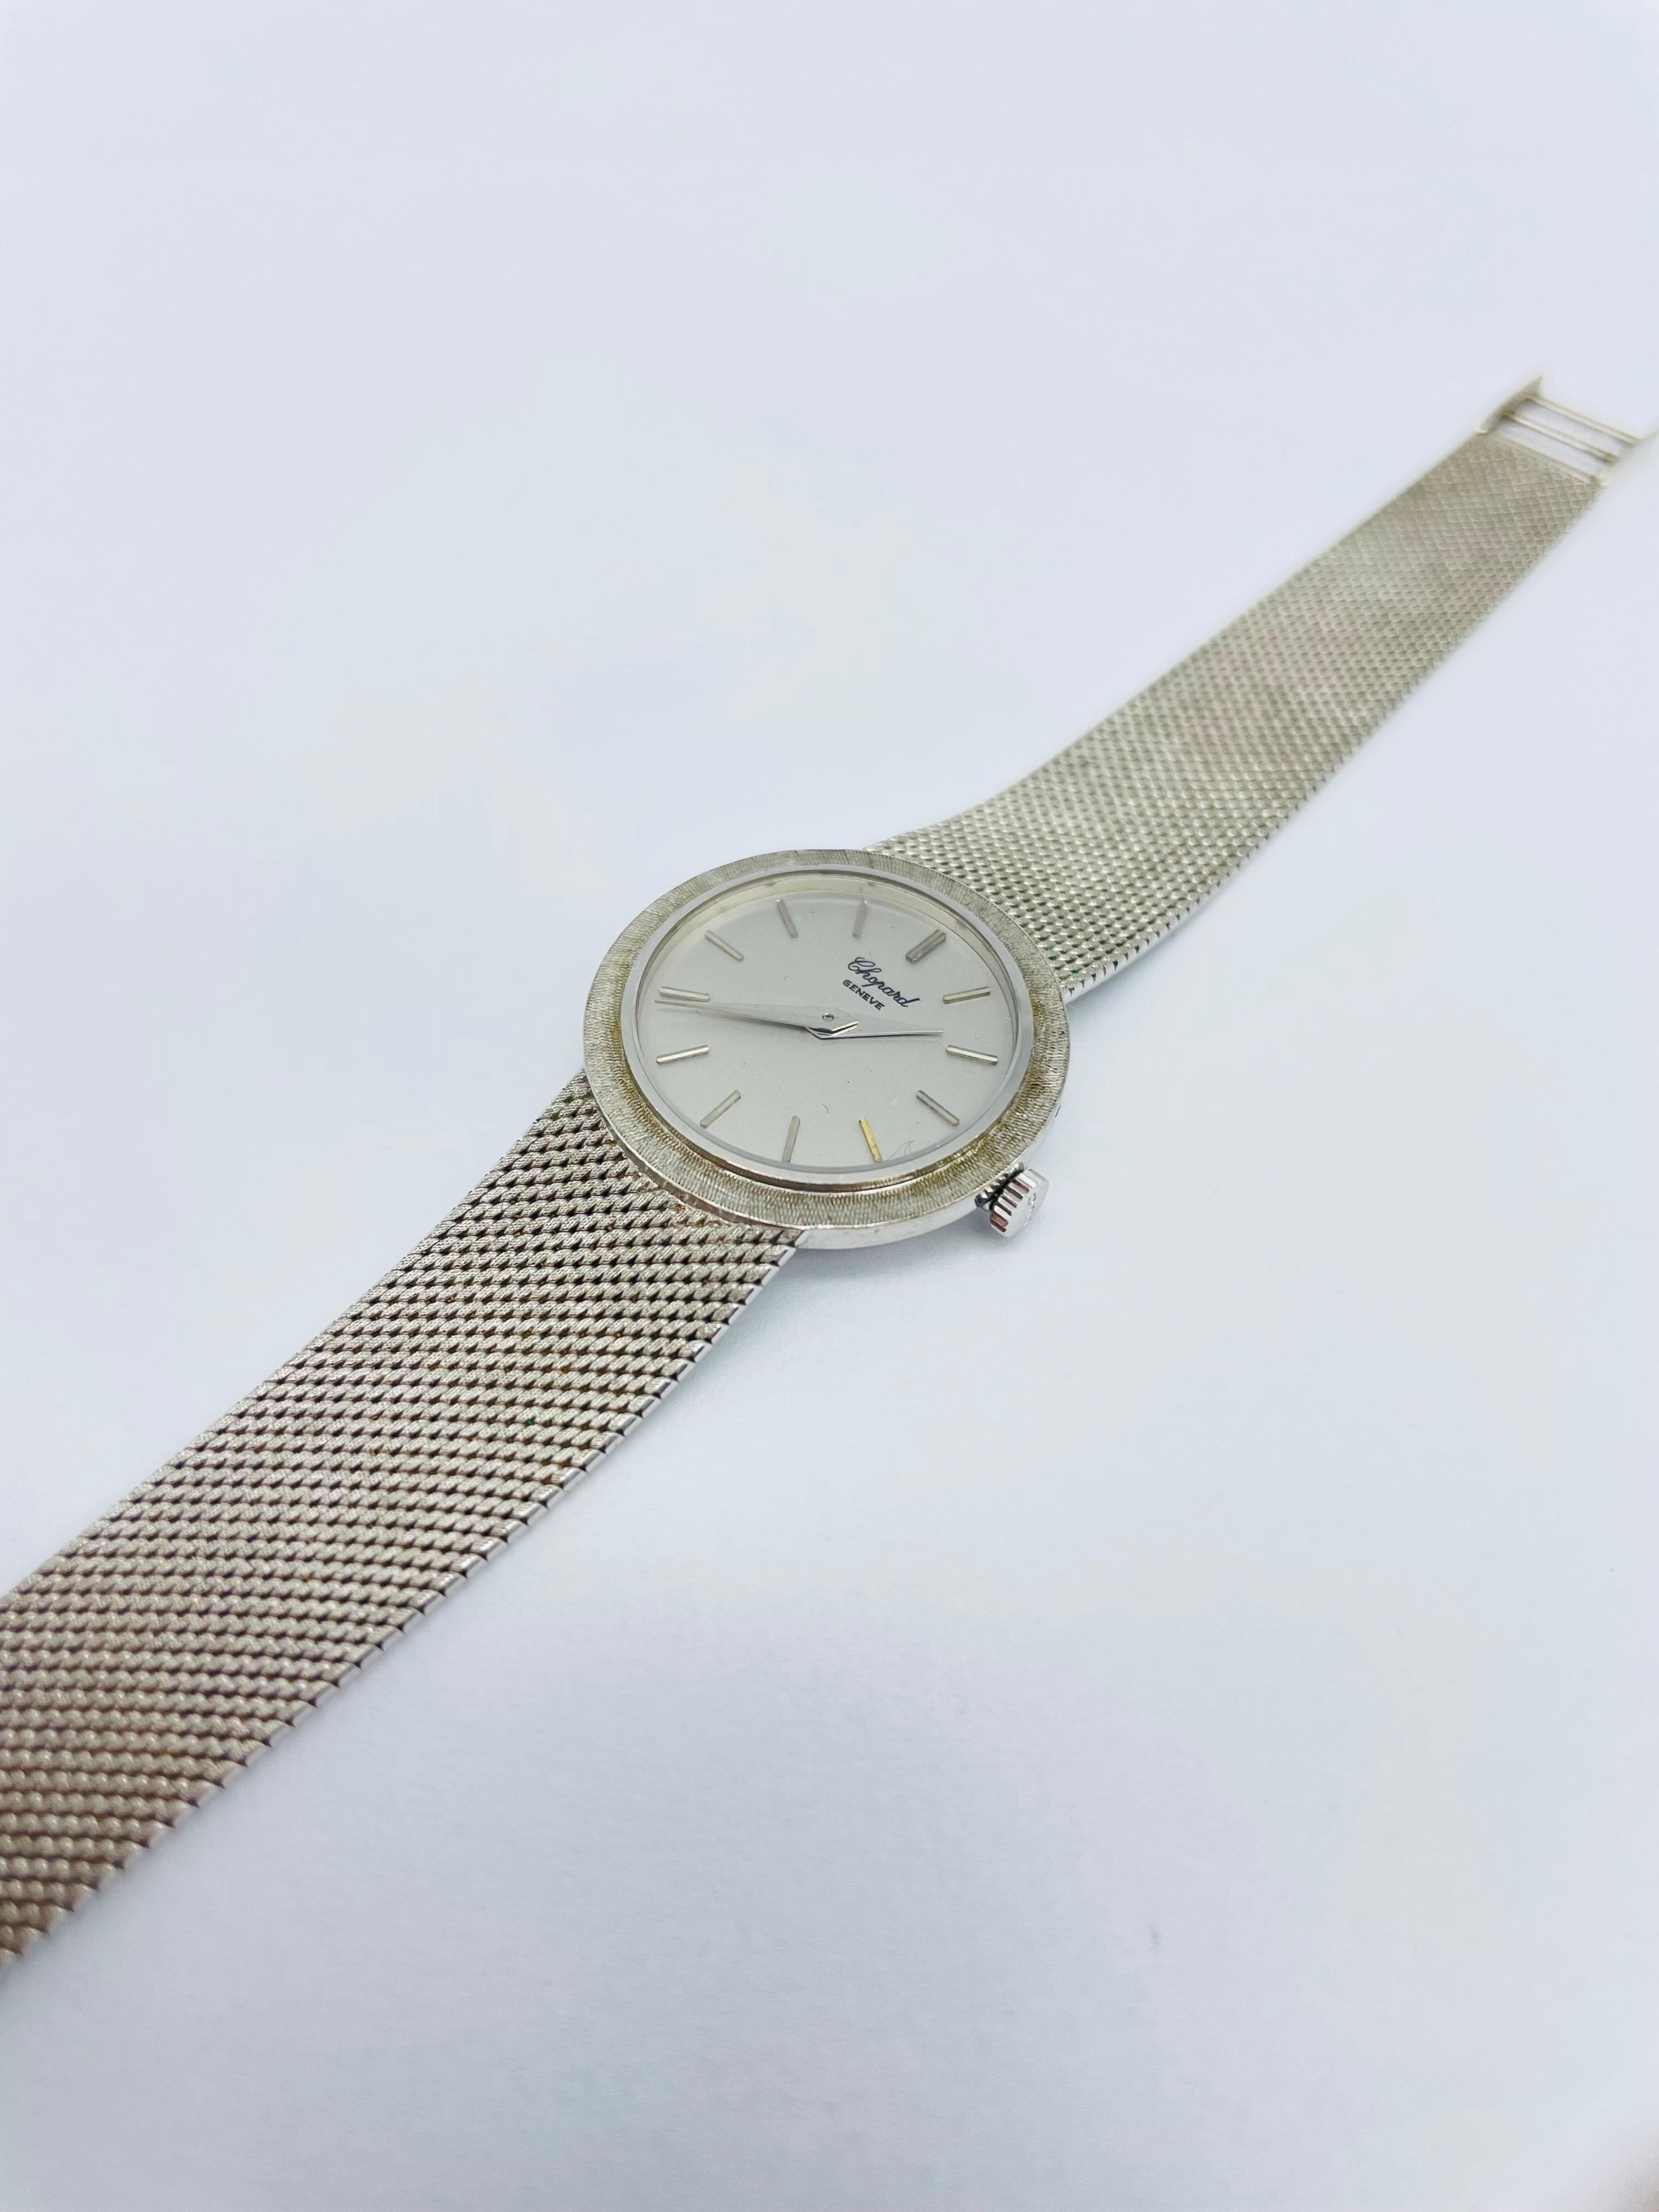 Vintage Chopard Ladies Watch 750 White Gold 18k Jewelry Ref. D6009 For Sale 3